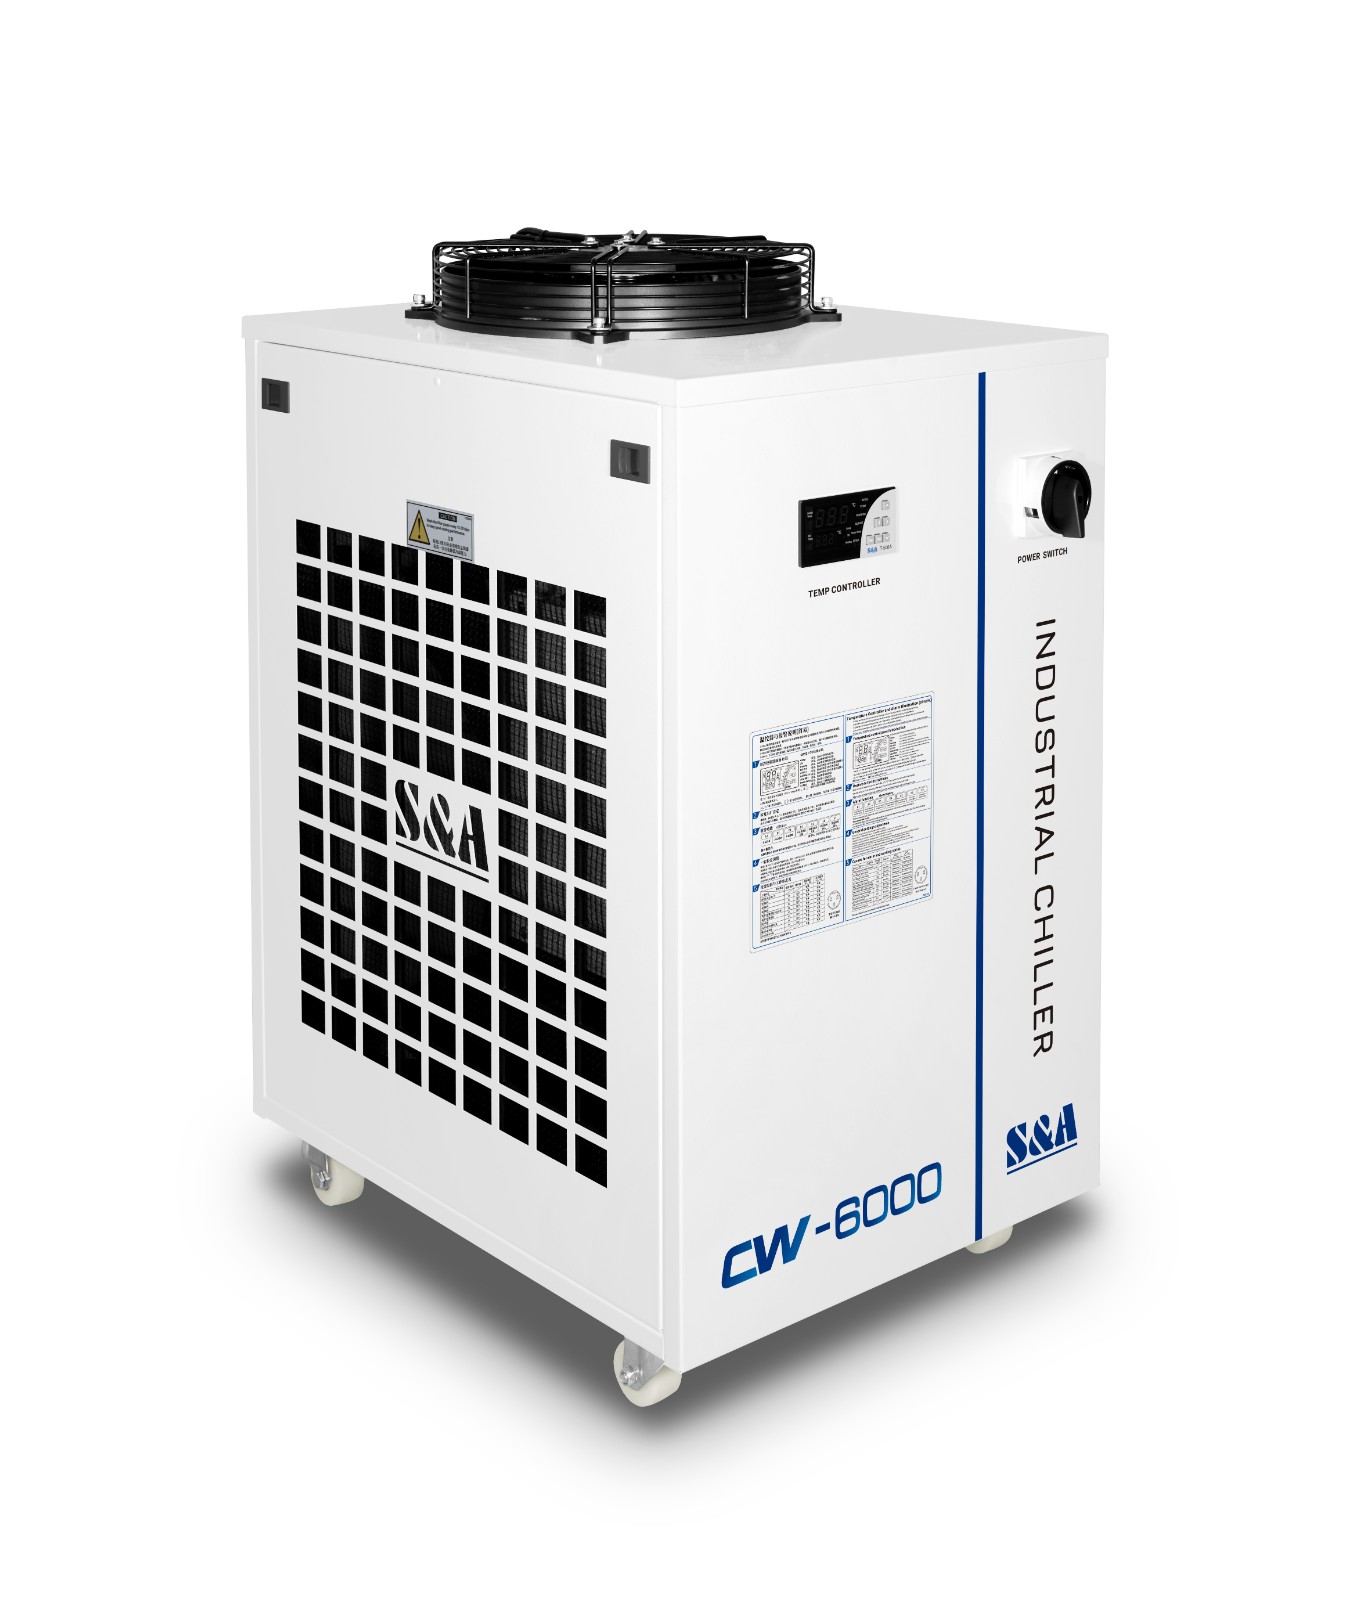 Industrial chiller CW-6000